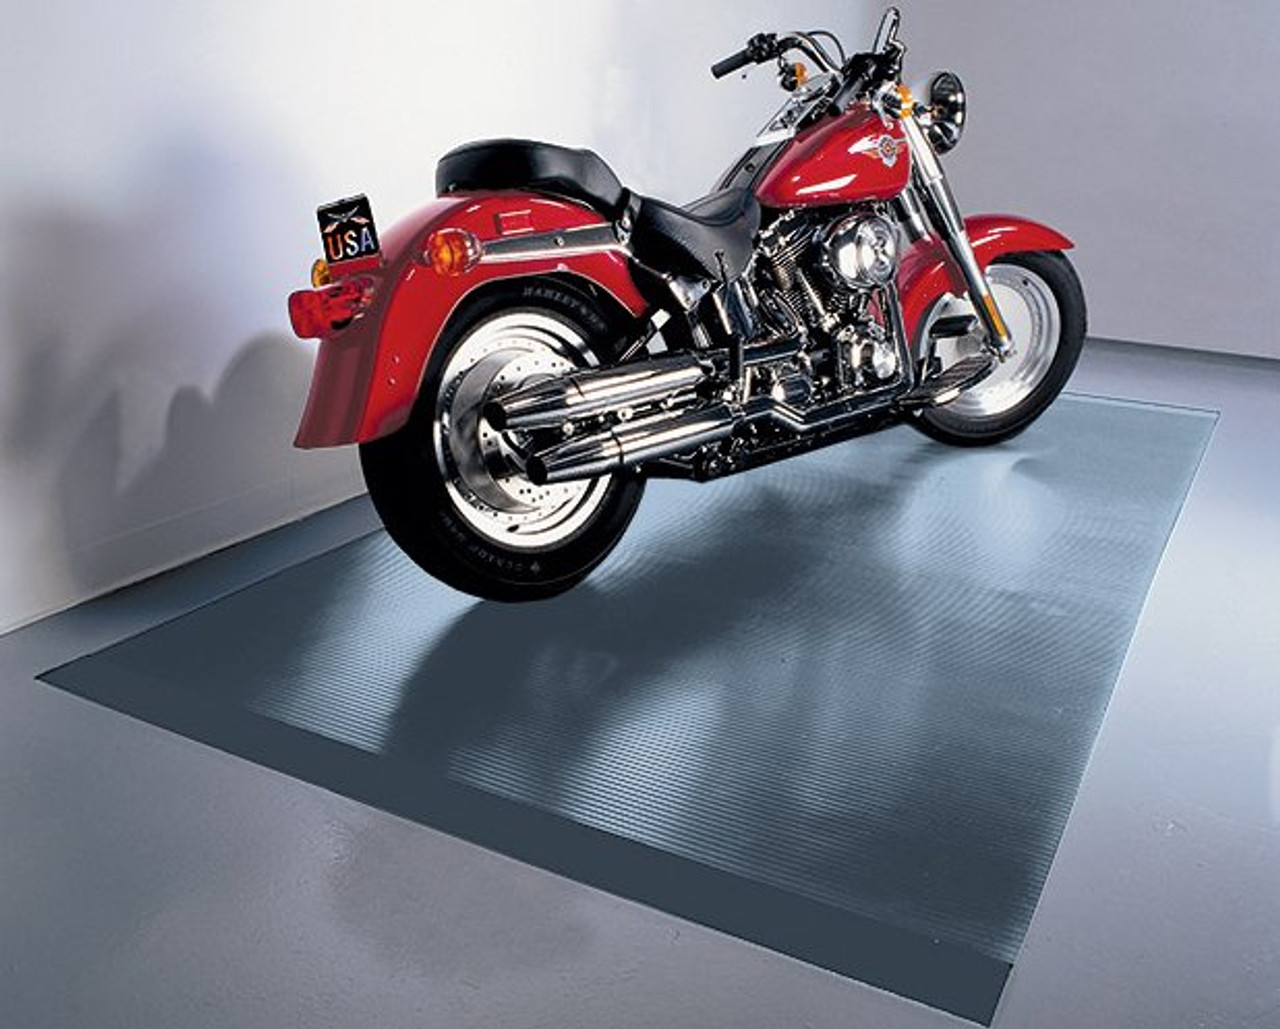 Motorcycle mat is available in Midnight Black and Slate Grey, 5' x